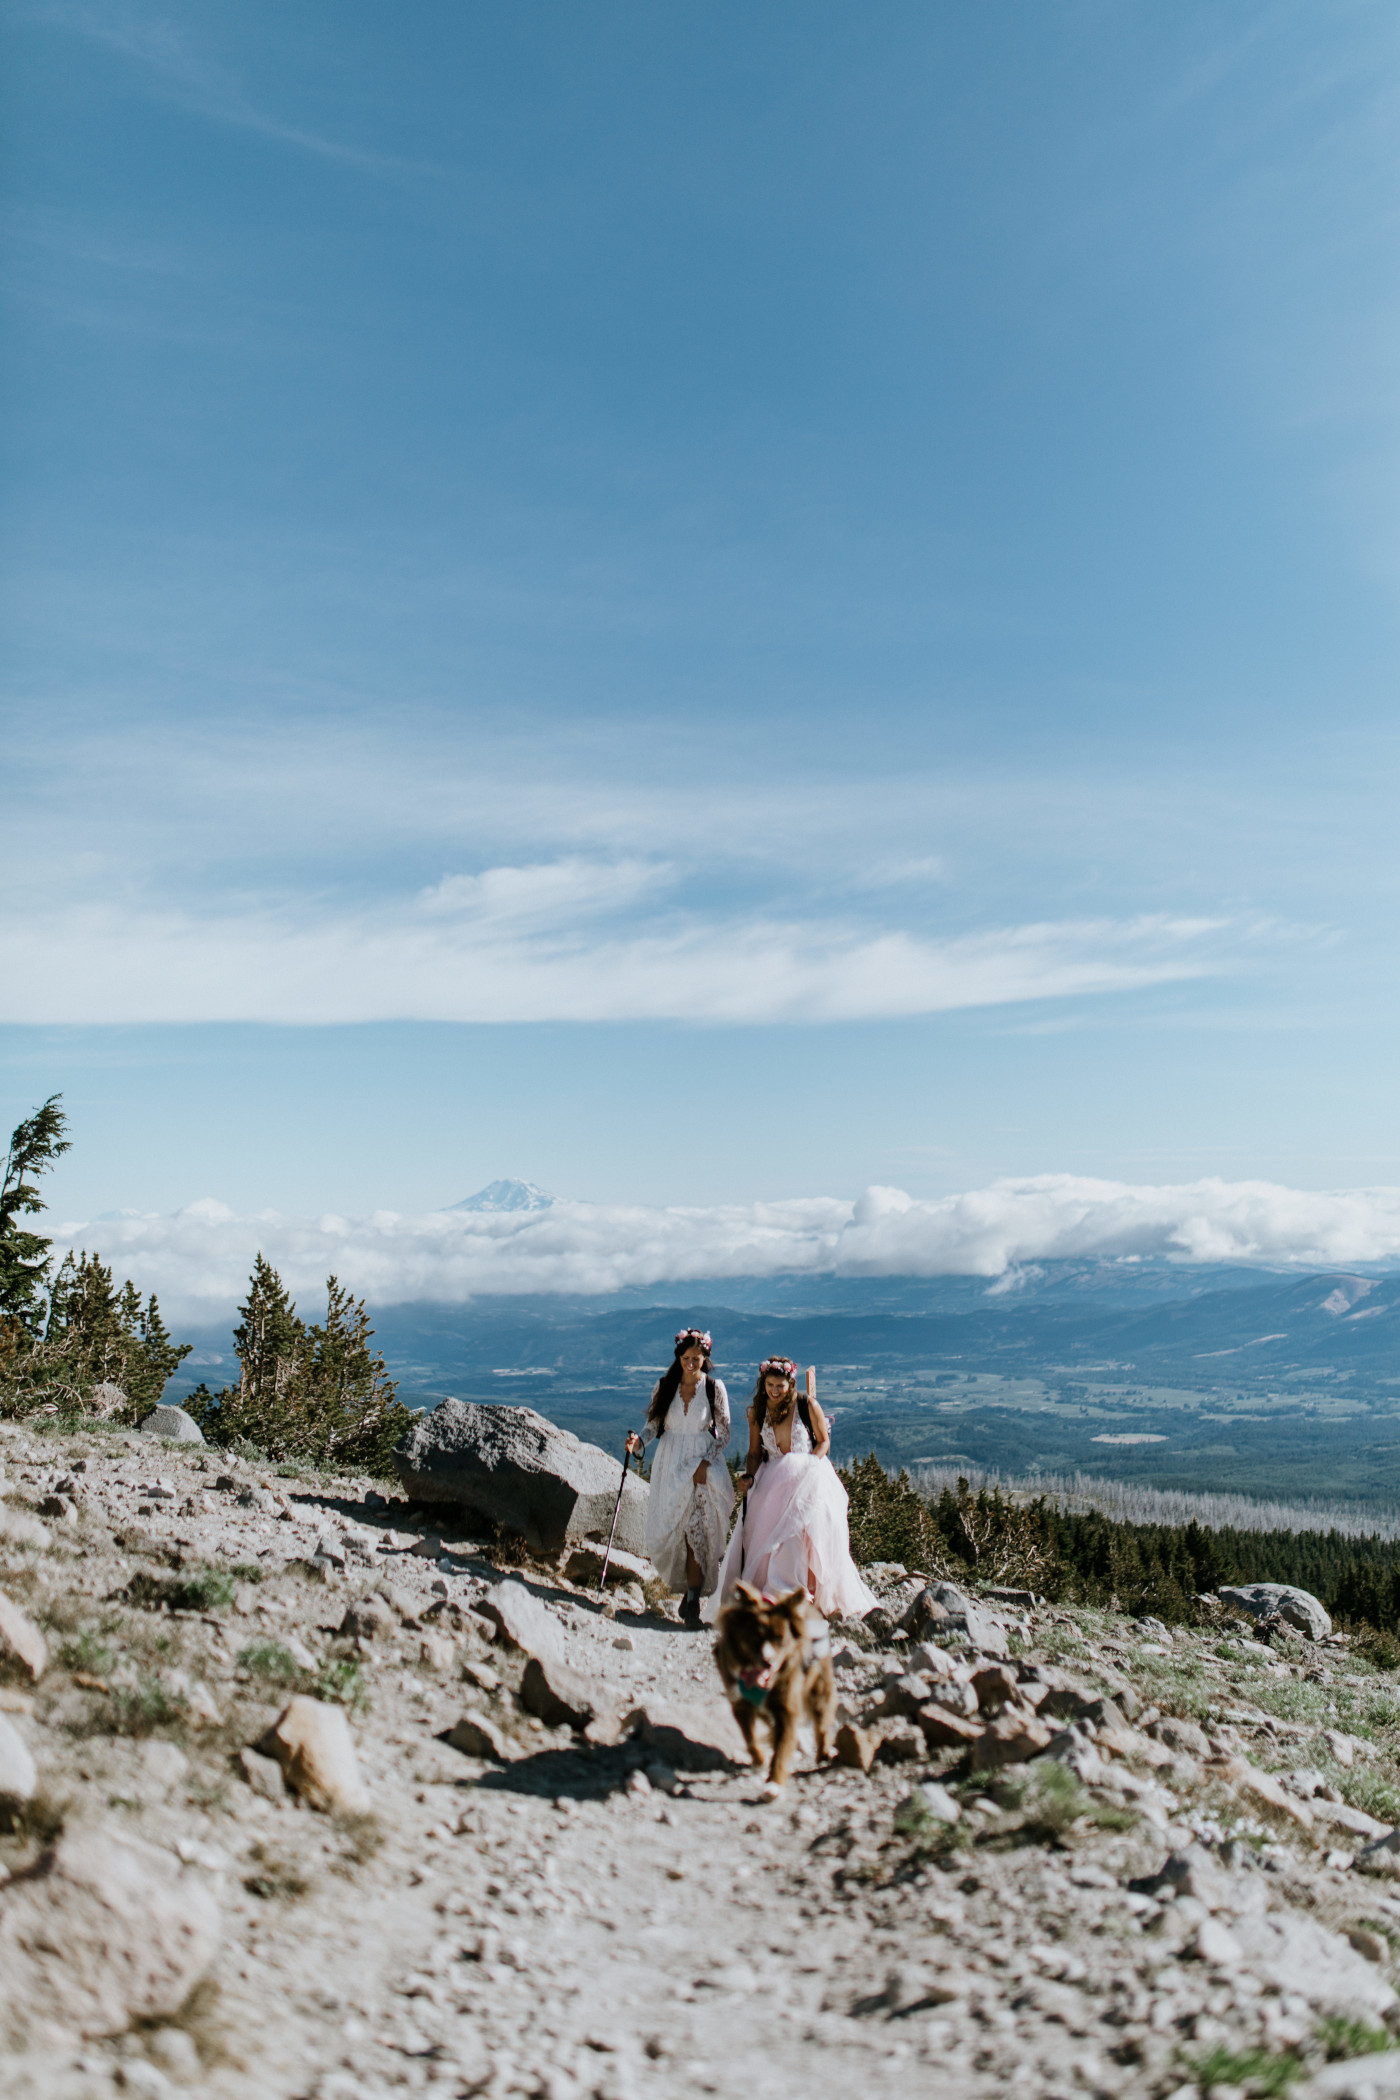 Heather and Margaux hiking up the mountain with a vast view behind them. Elopement photography at Mount Hood by Sienna Plus Josh.